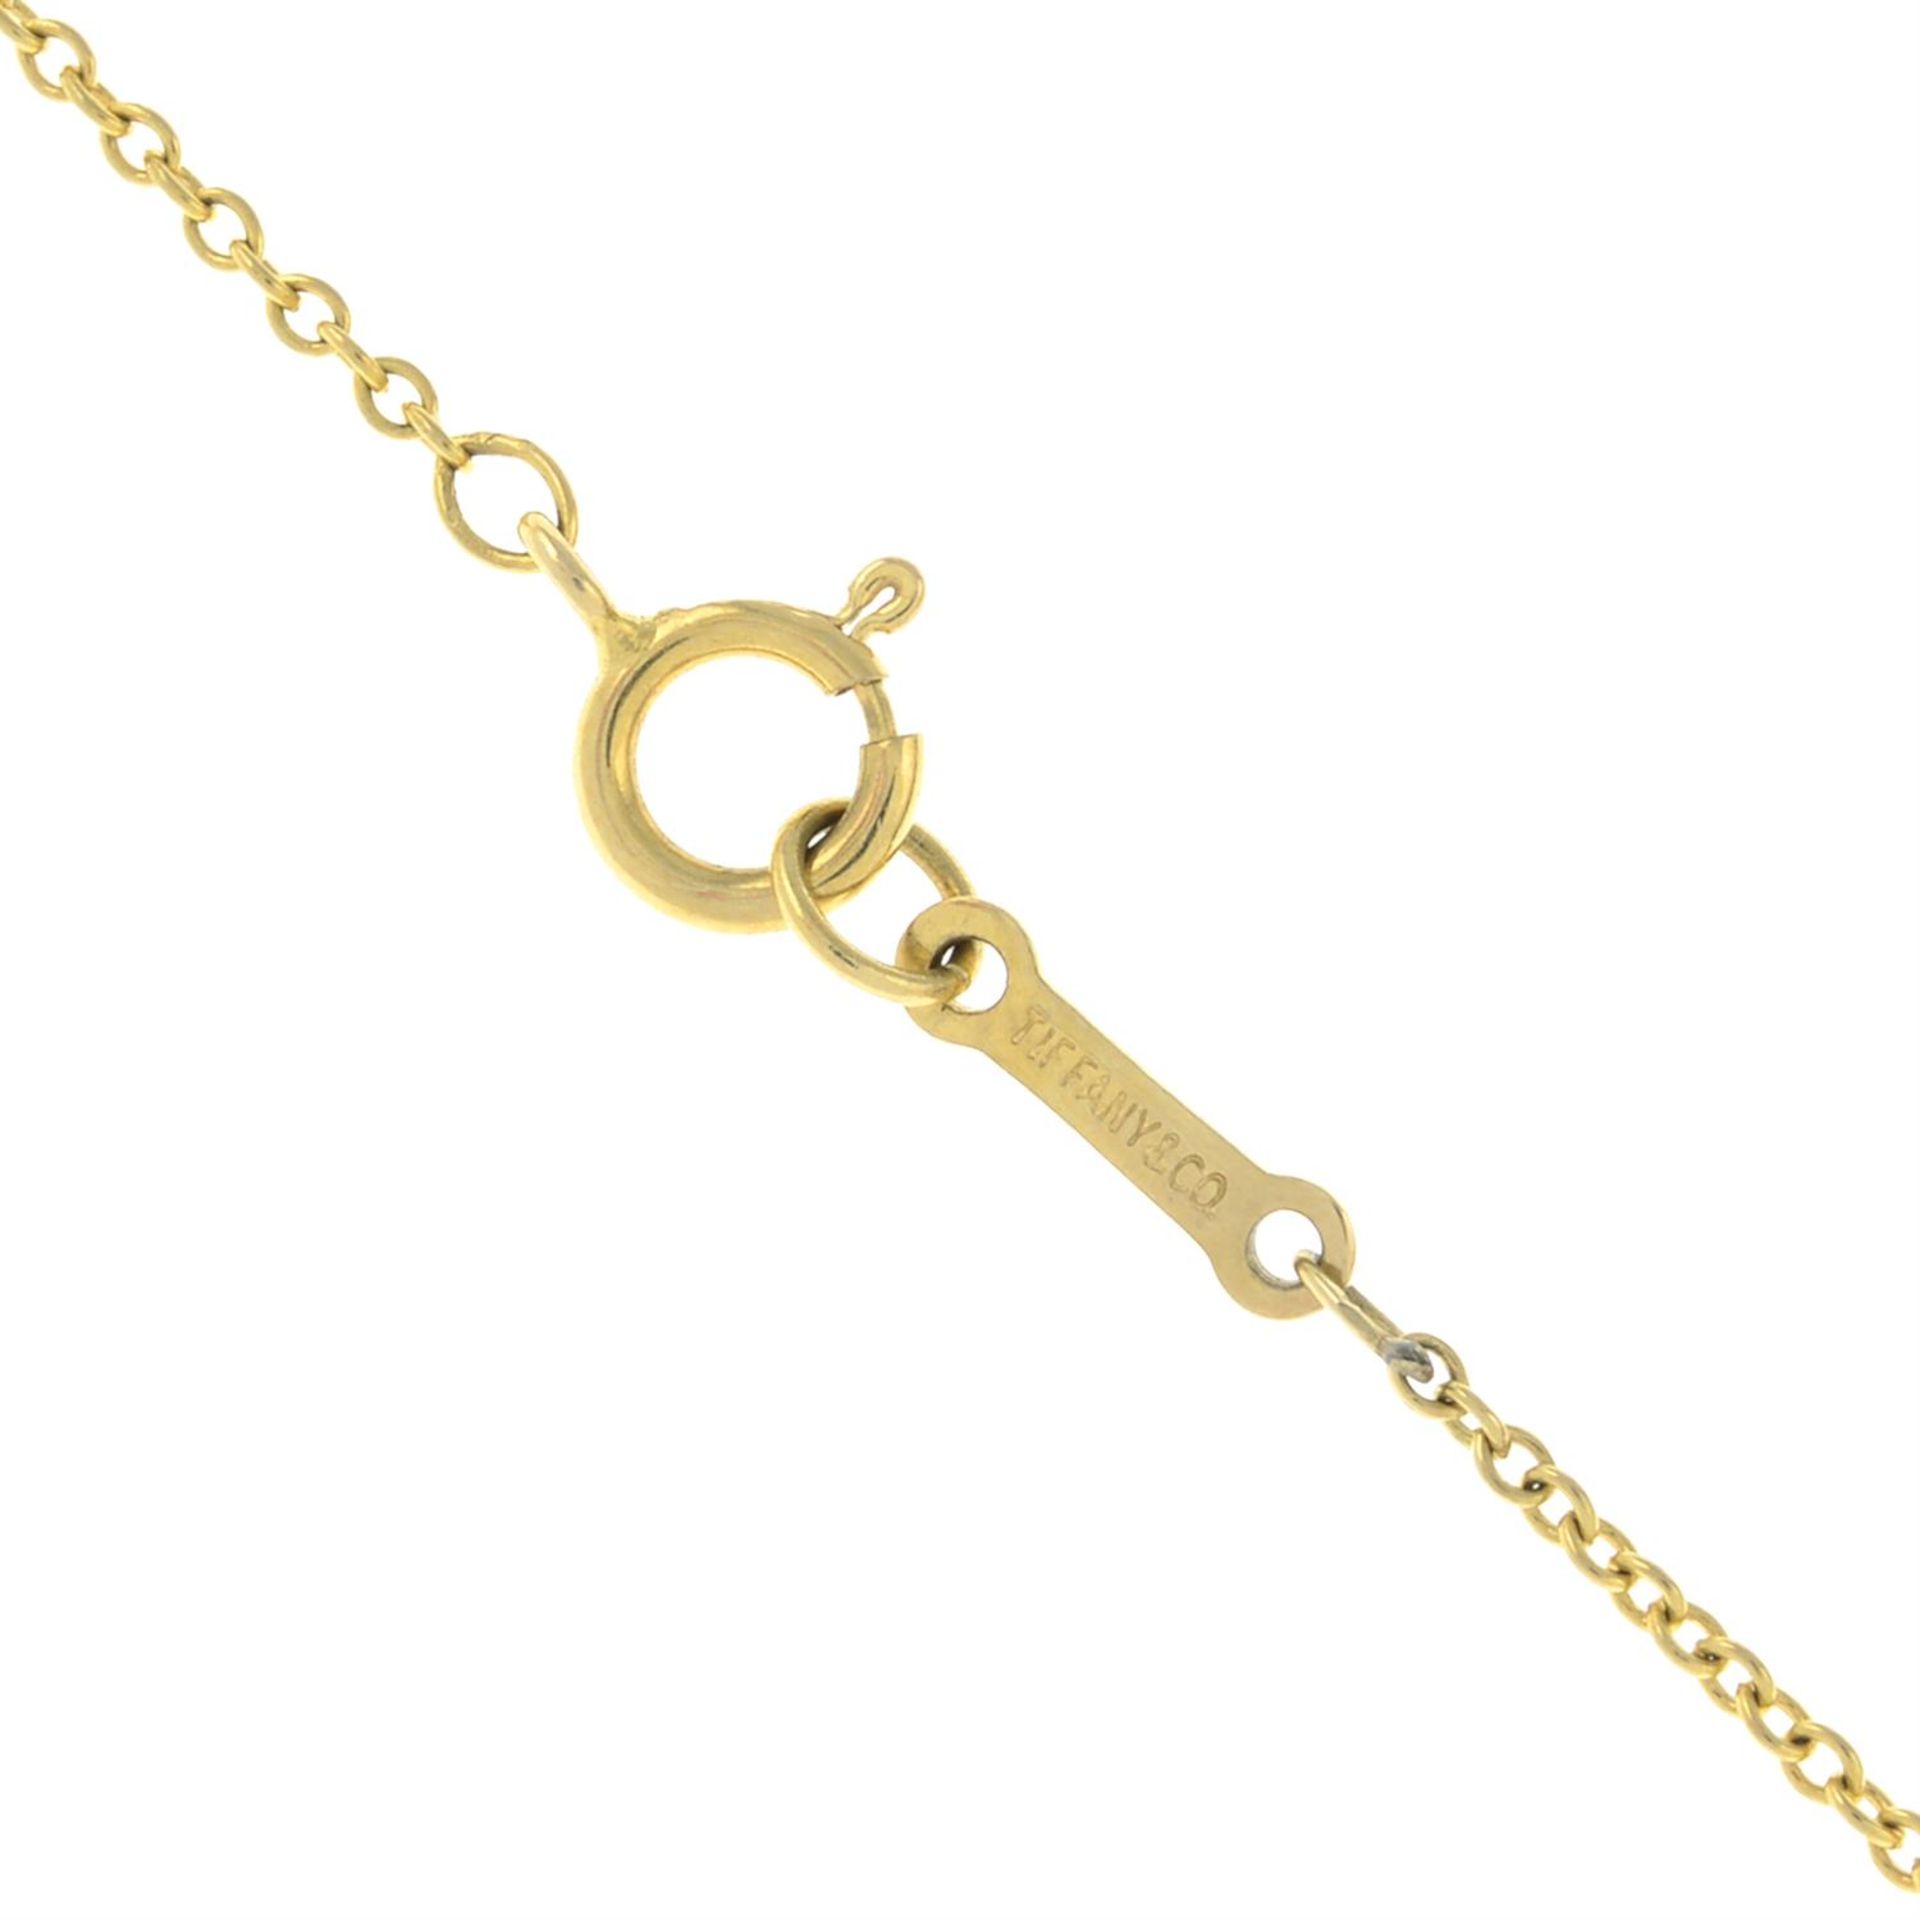 An 'Open Heart' pendant, with chain, by Elsa Peretti for Tiffany & Co. - Image 4 of 4